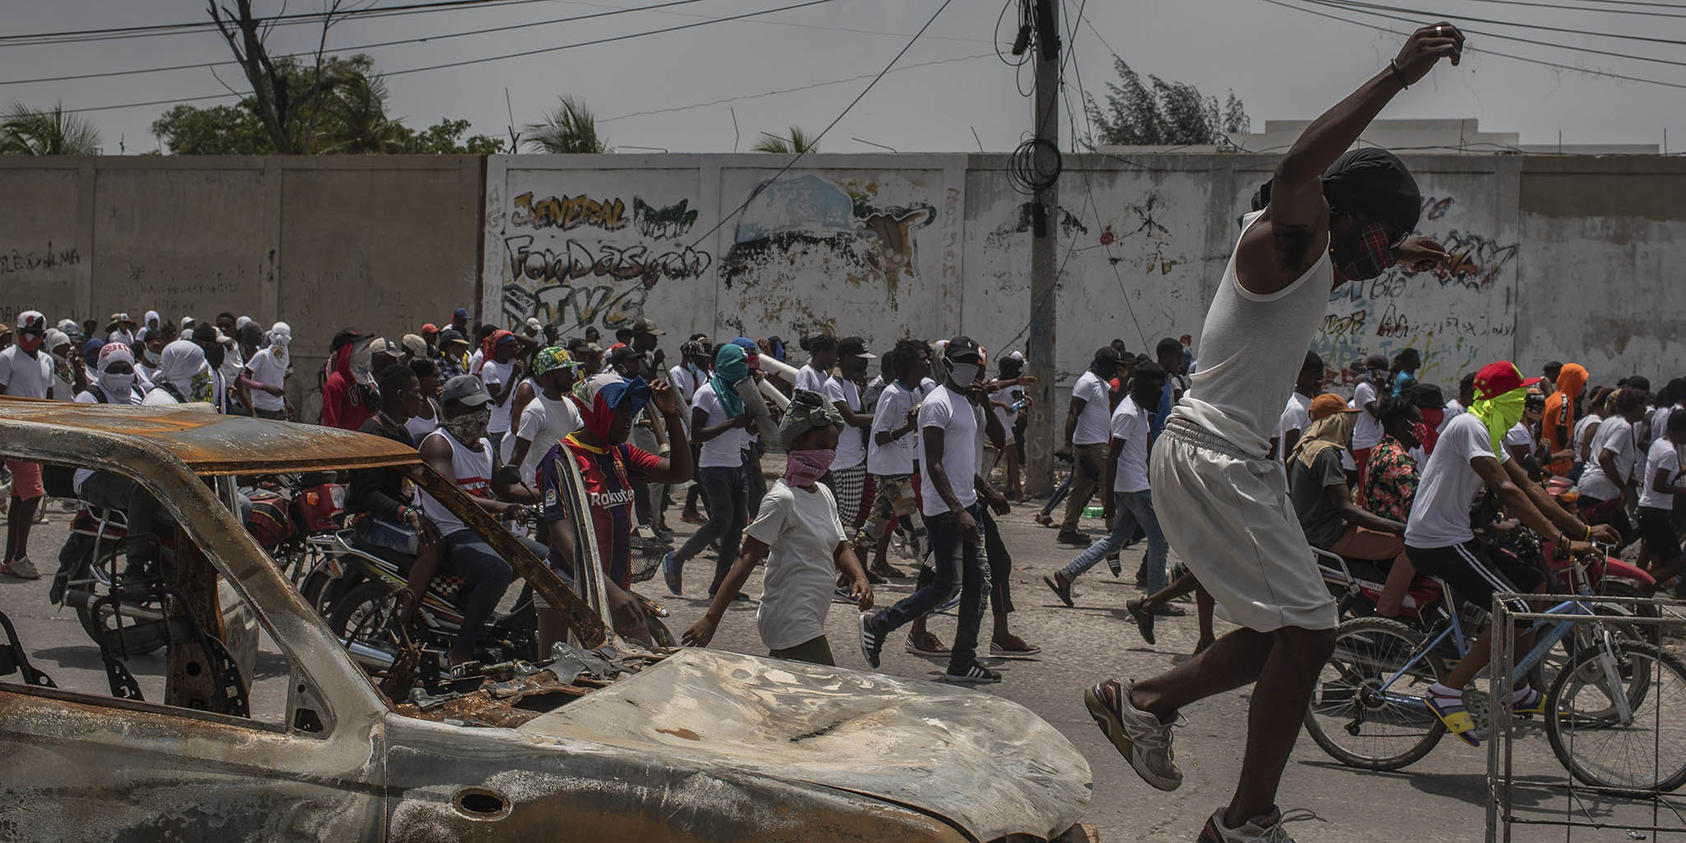 Members of the G9 gang protest the assassination of Haitian President Jovenel Moise in Port-au-Prince. July 26, 2021. (Victor Moriyama/The New York Times)